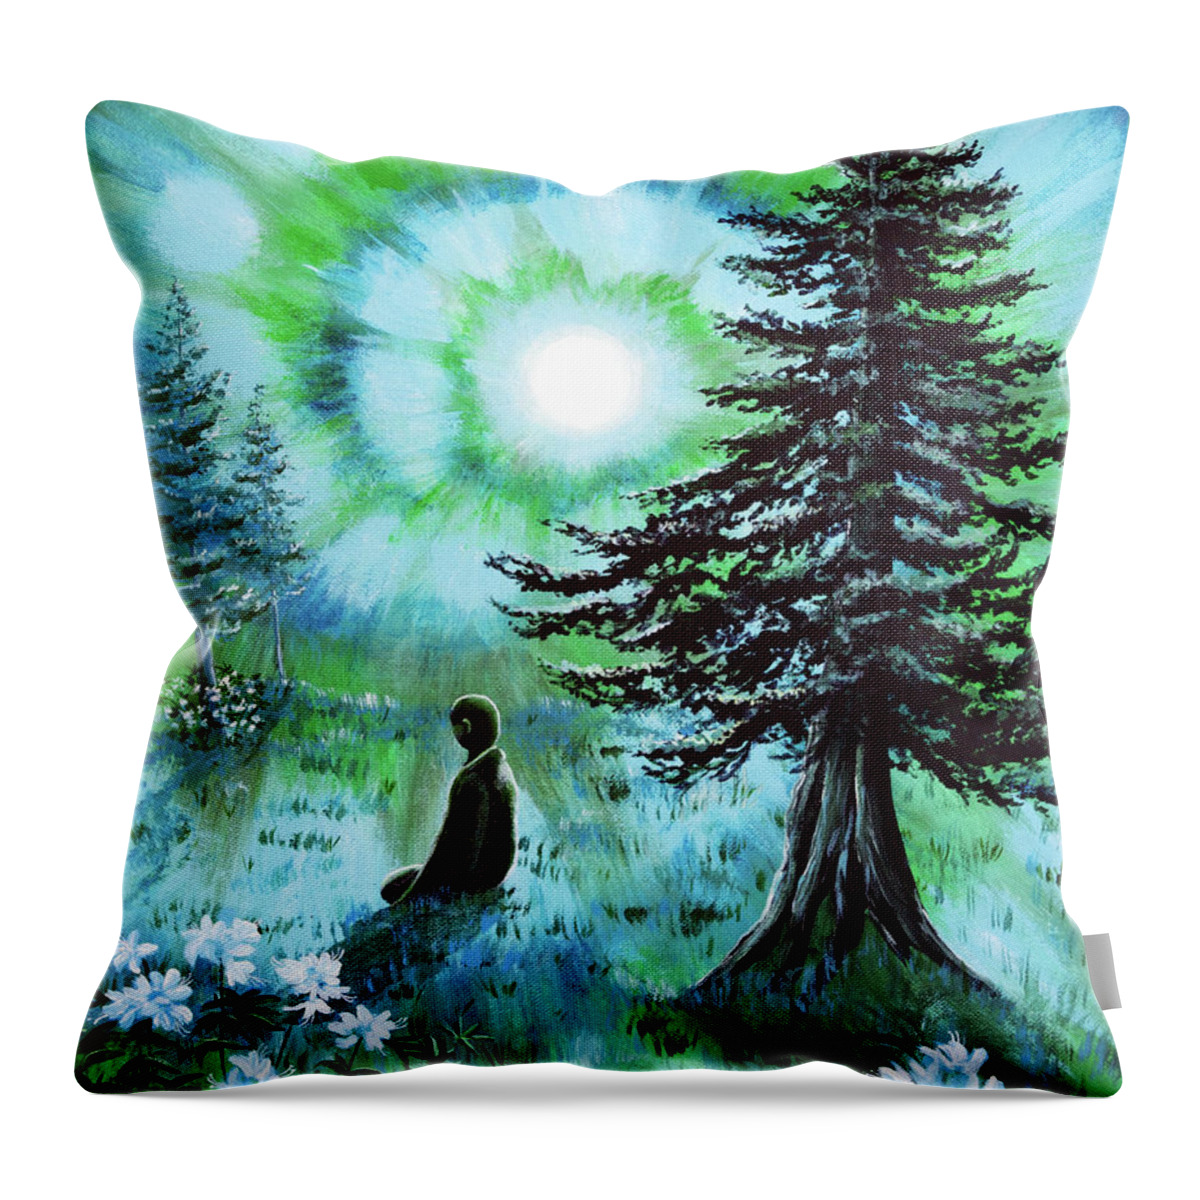 Blue Throw Pillow featuring the painting Early Morning Meditation in Blues and Greens by Laura Iverson